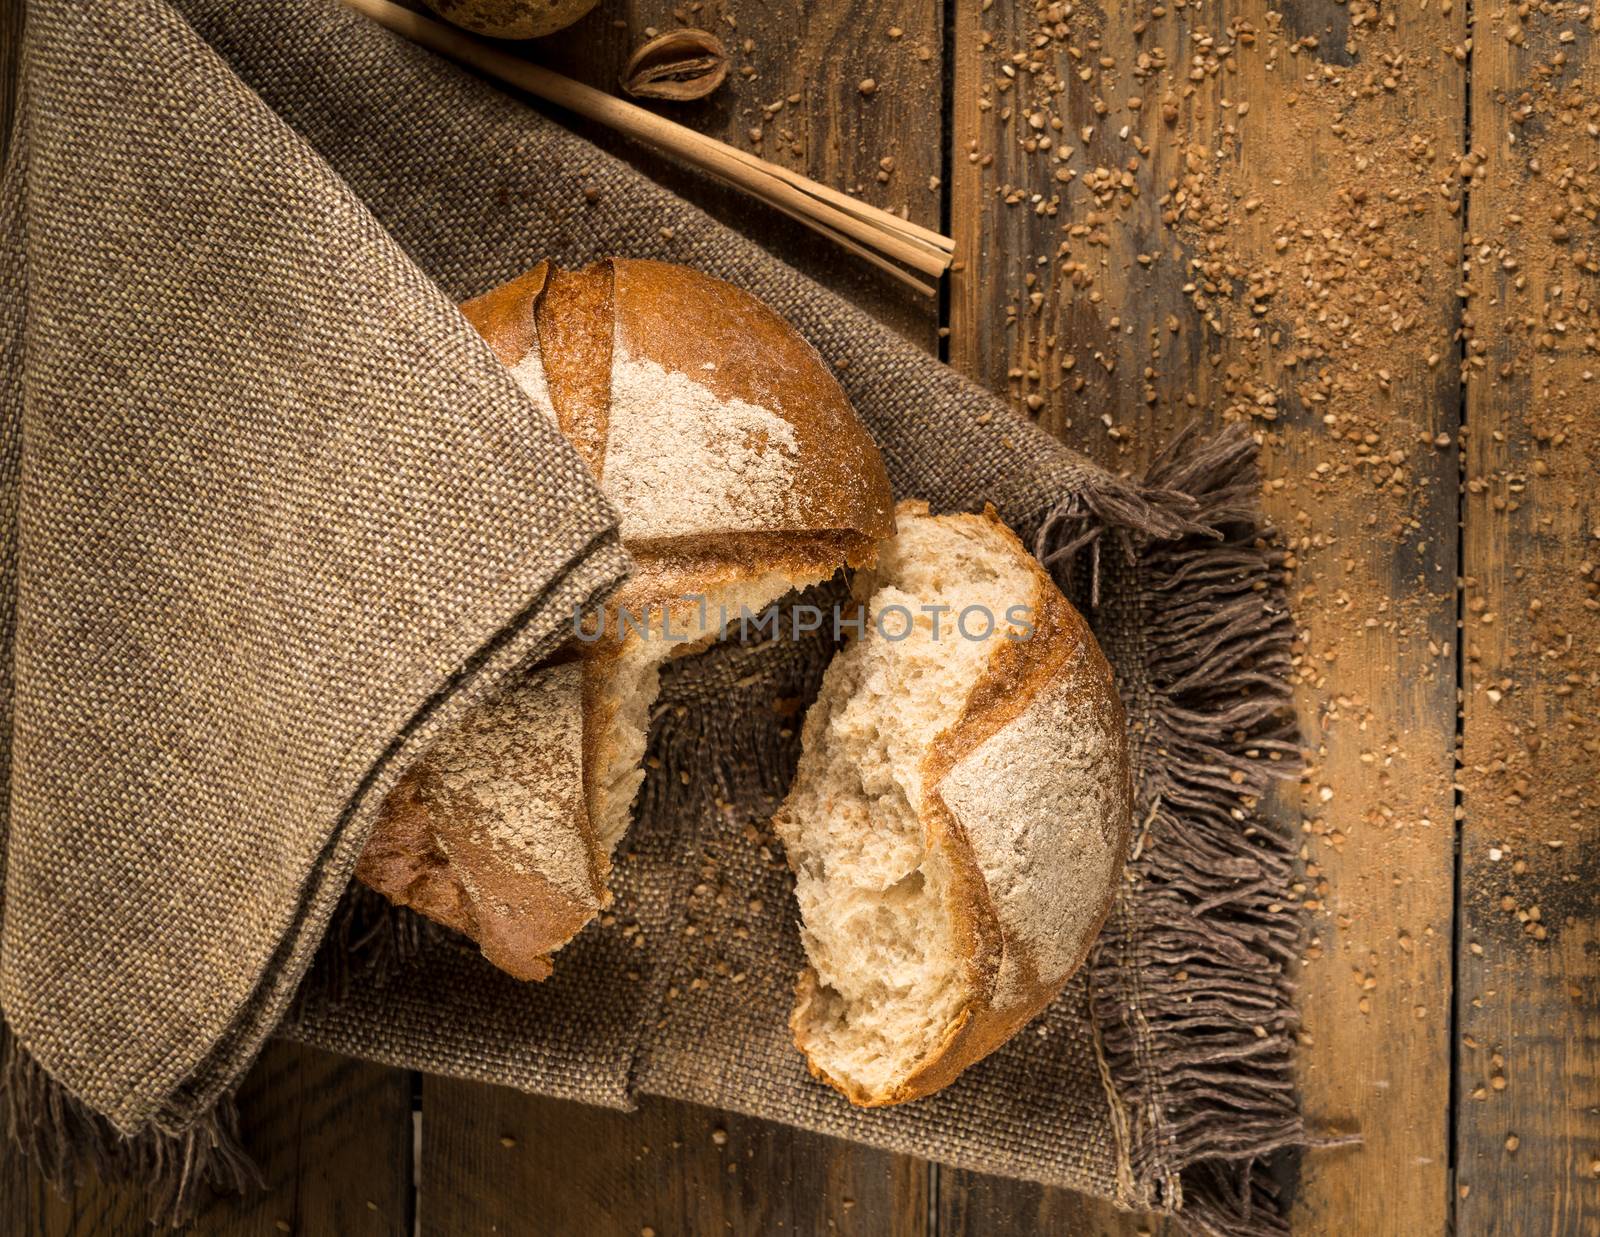 a broken loaf of bread on a cloth napkin and wooden boards with crumbs